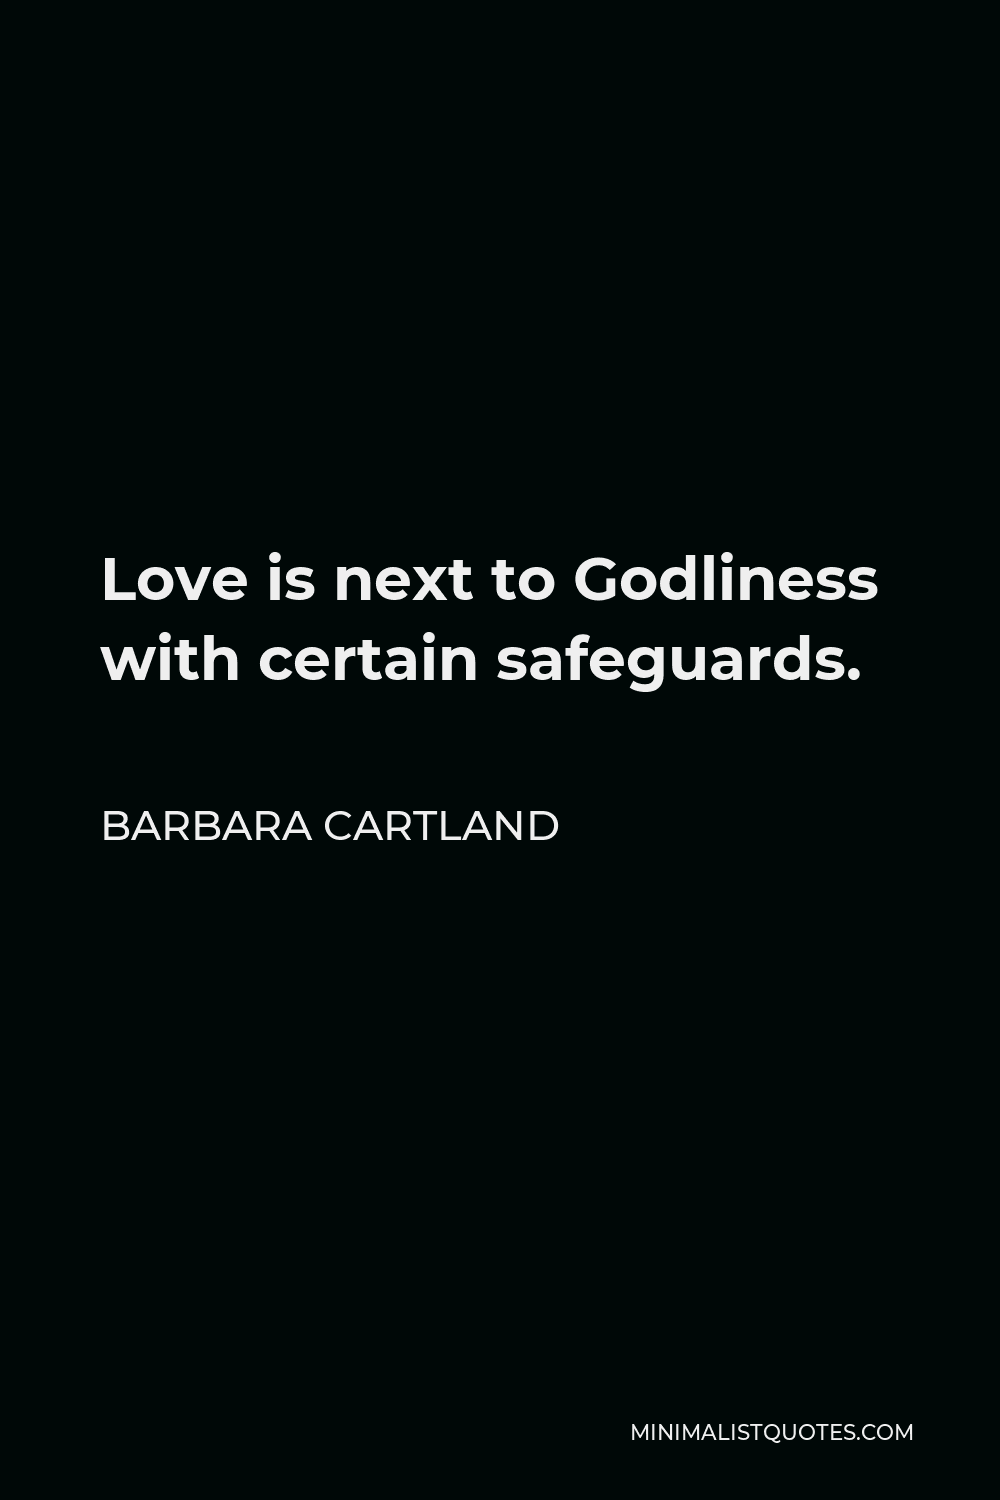 Barbara Cartland Quote - Love is next to Godliness with certain safeguards.